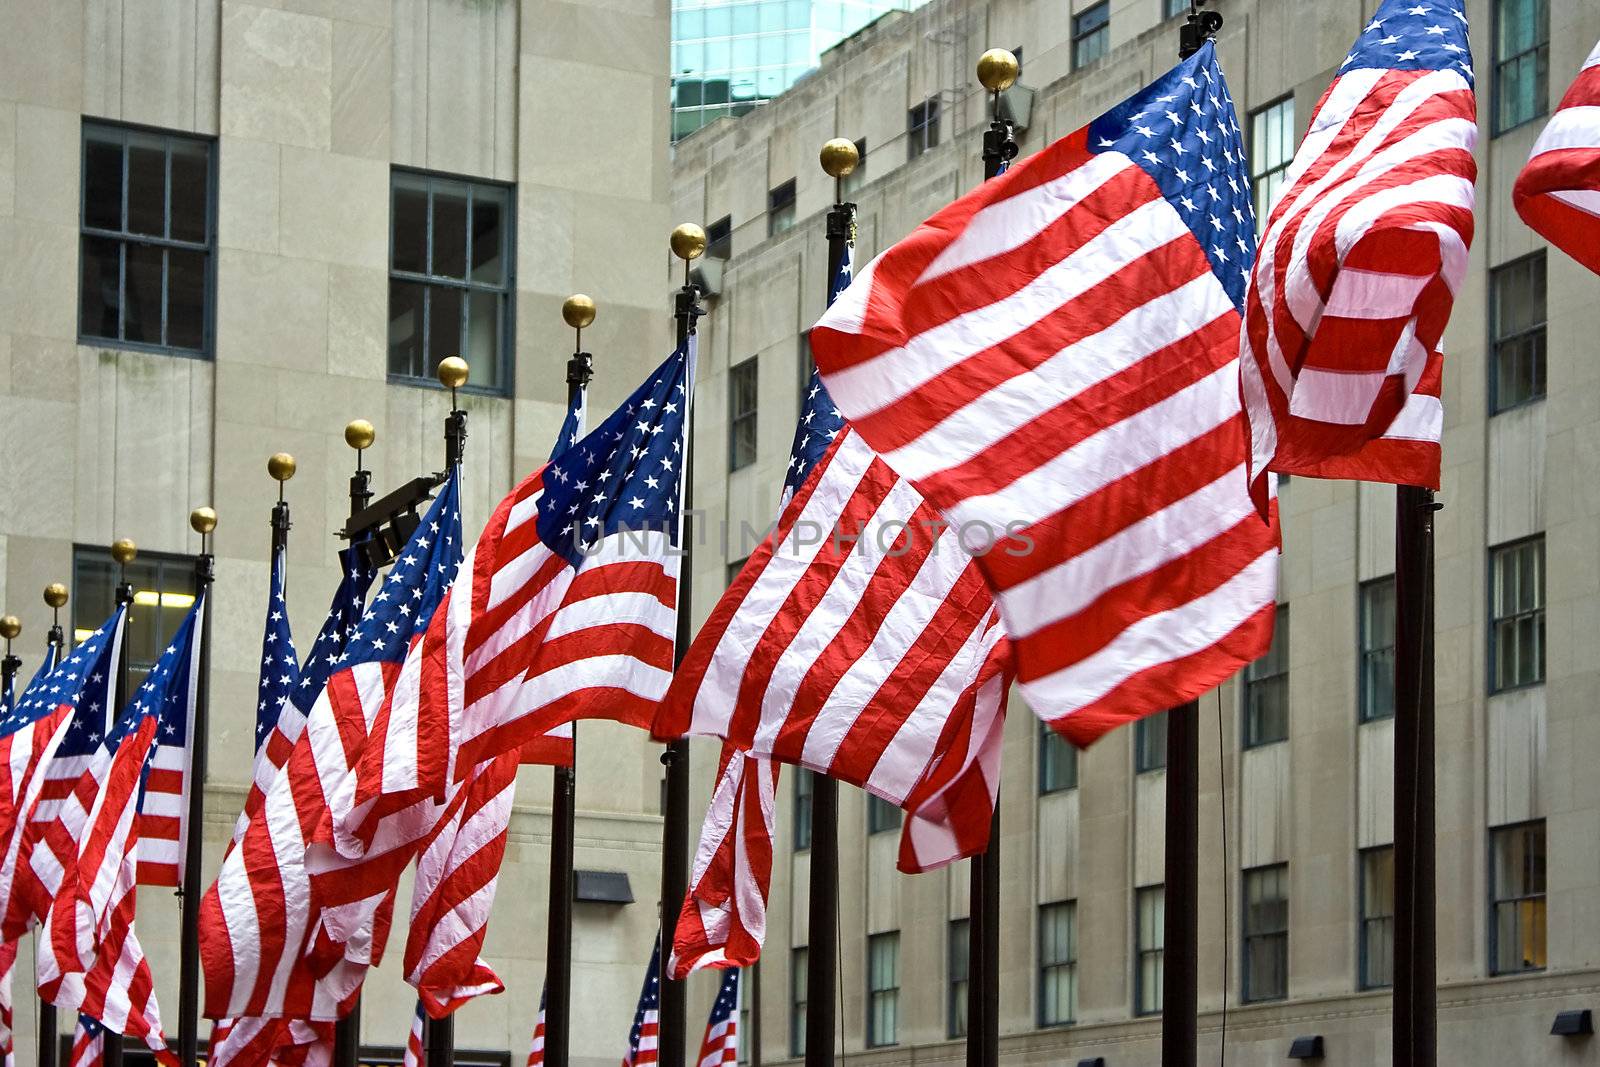 A row of American flags by phakimata